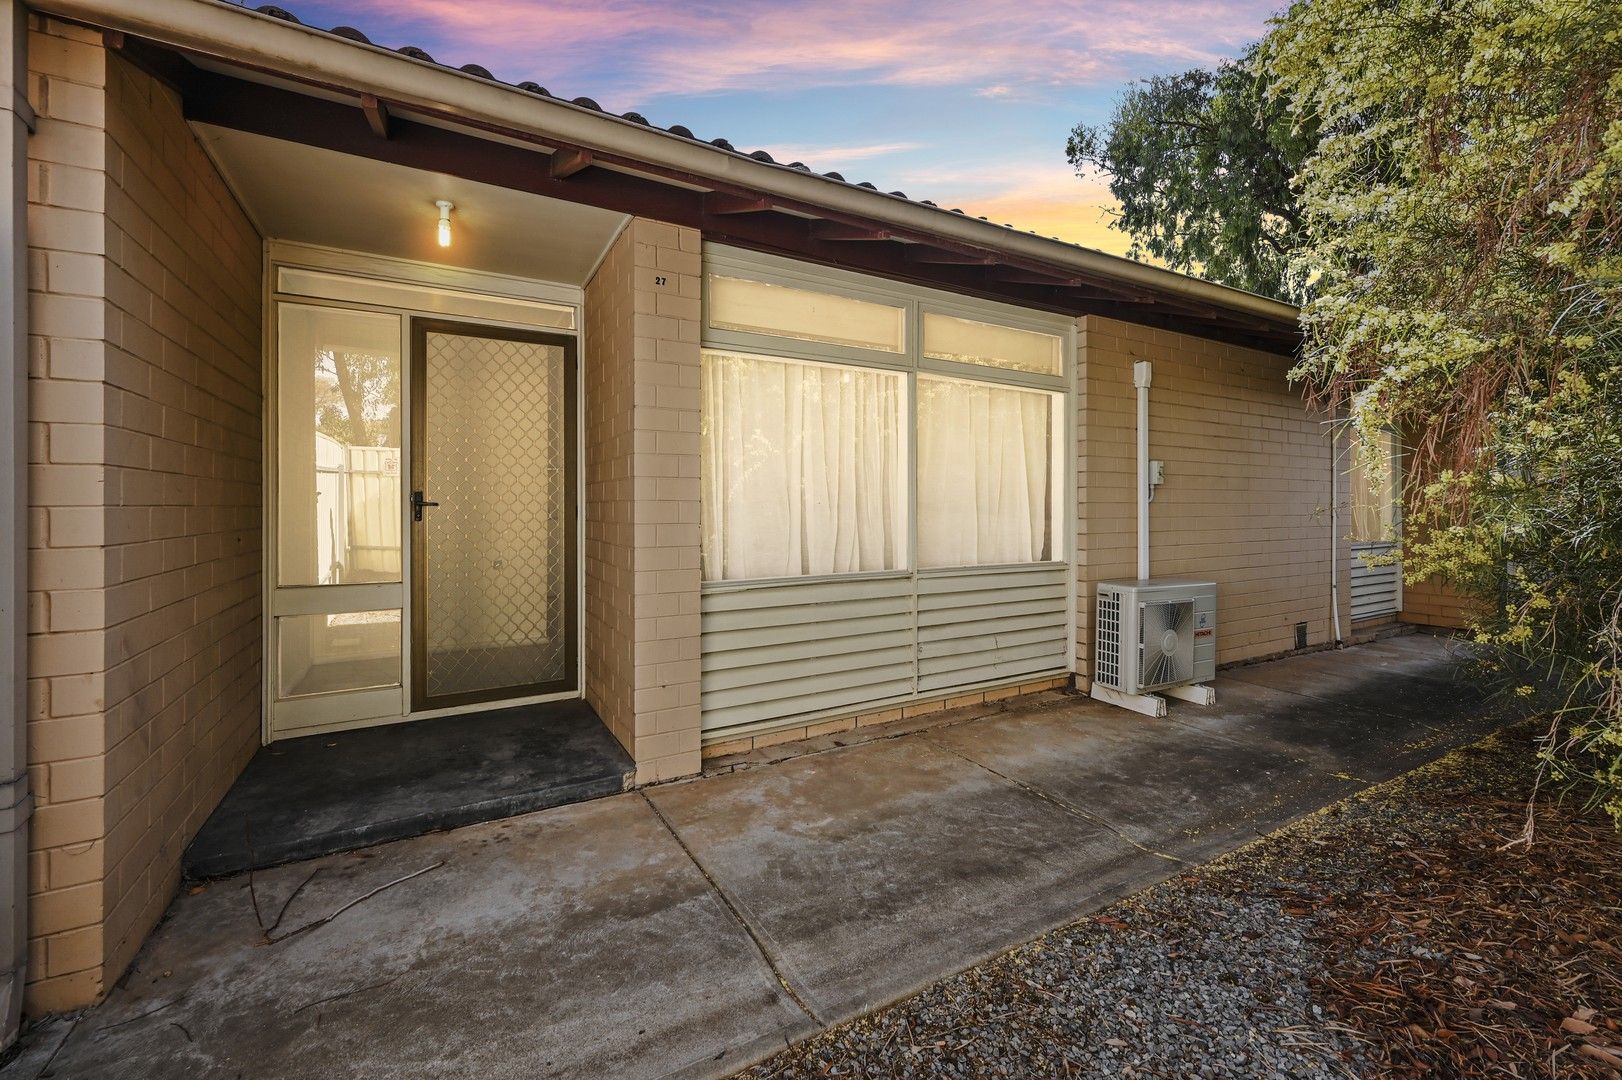 2 bedrooms House in 27/28 Mostyn Crescent SALISBURY EAST SA, 5109